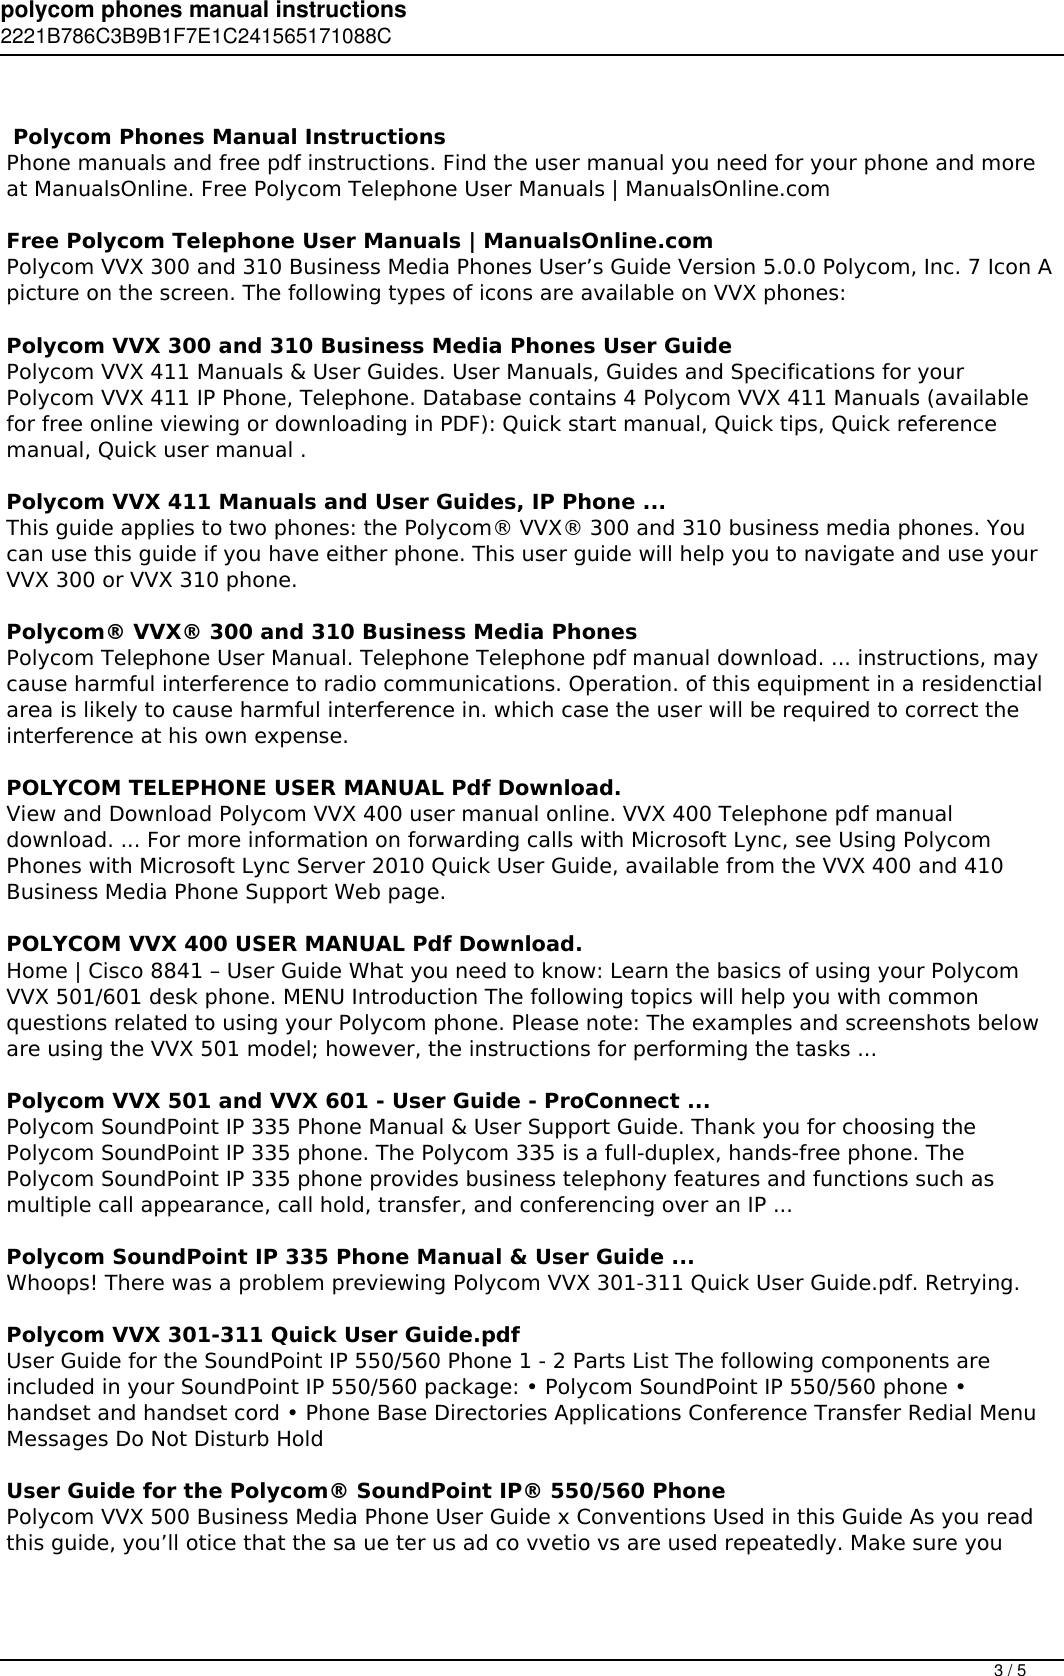 Page 3 of 5 - Polycom Phones Manual Instructions